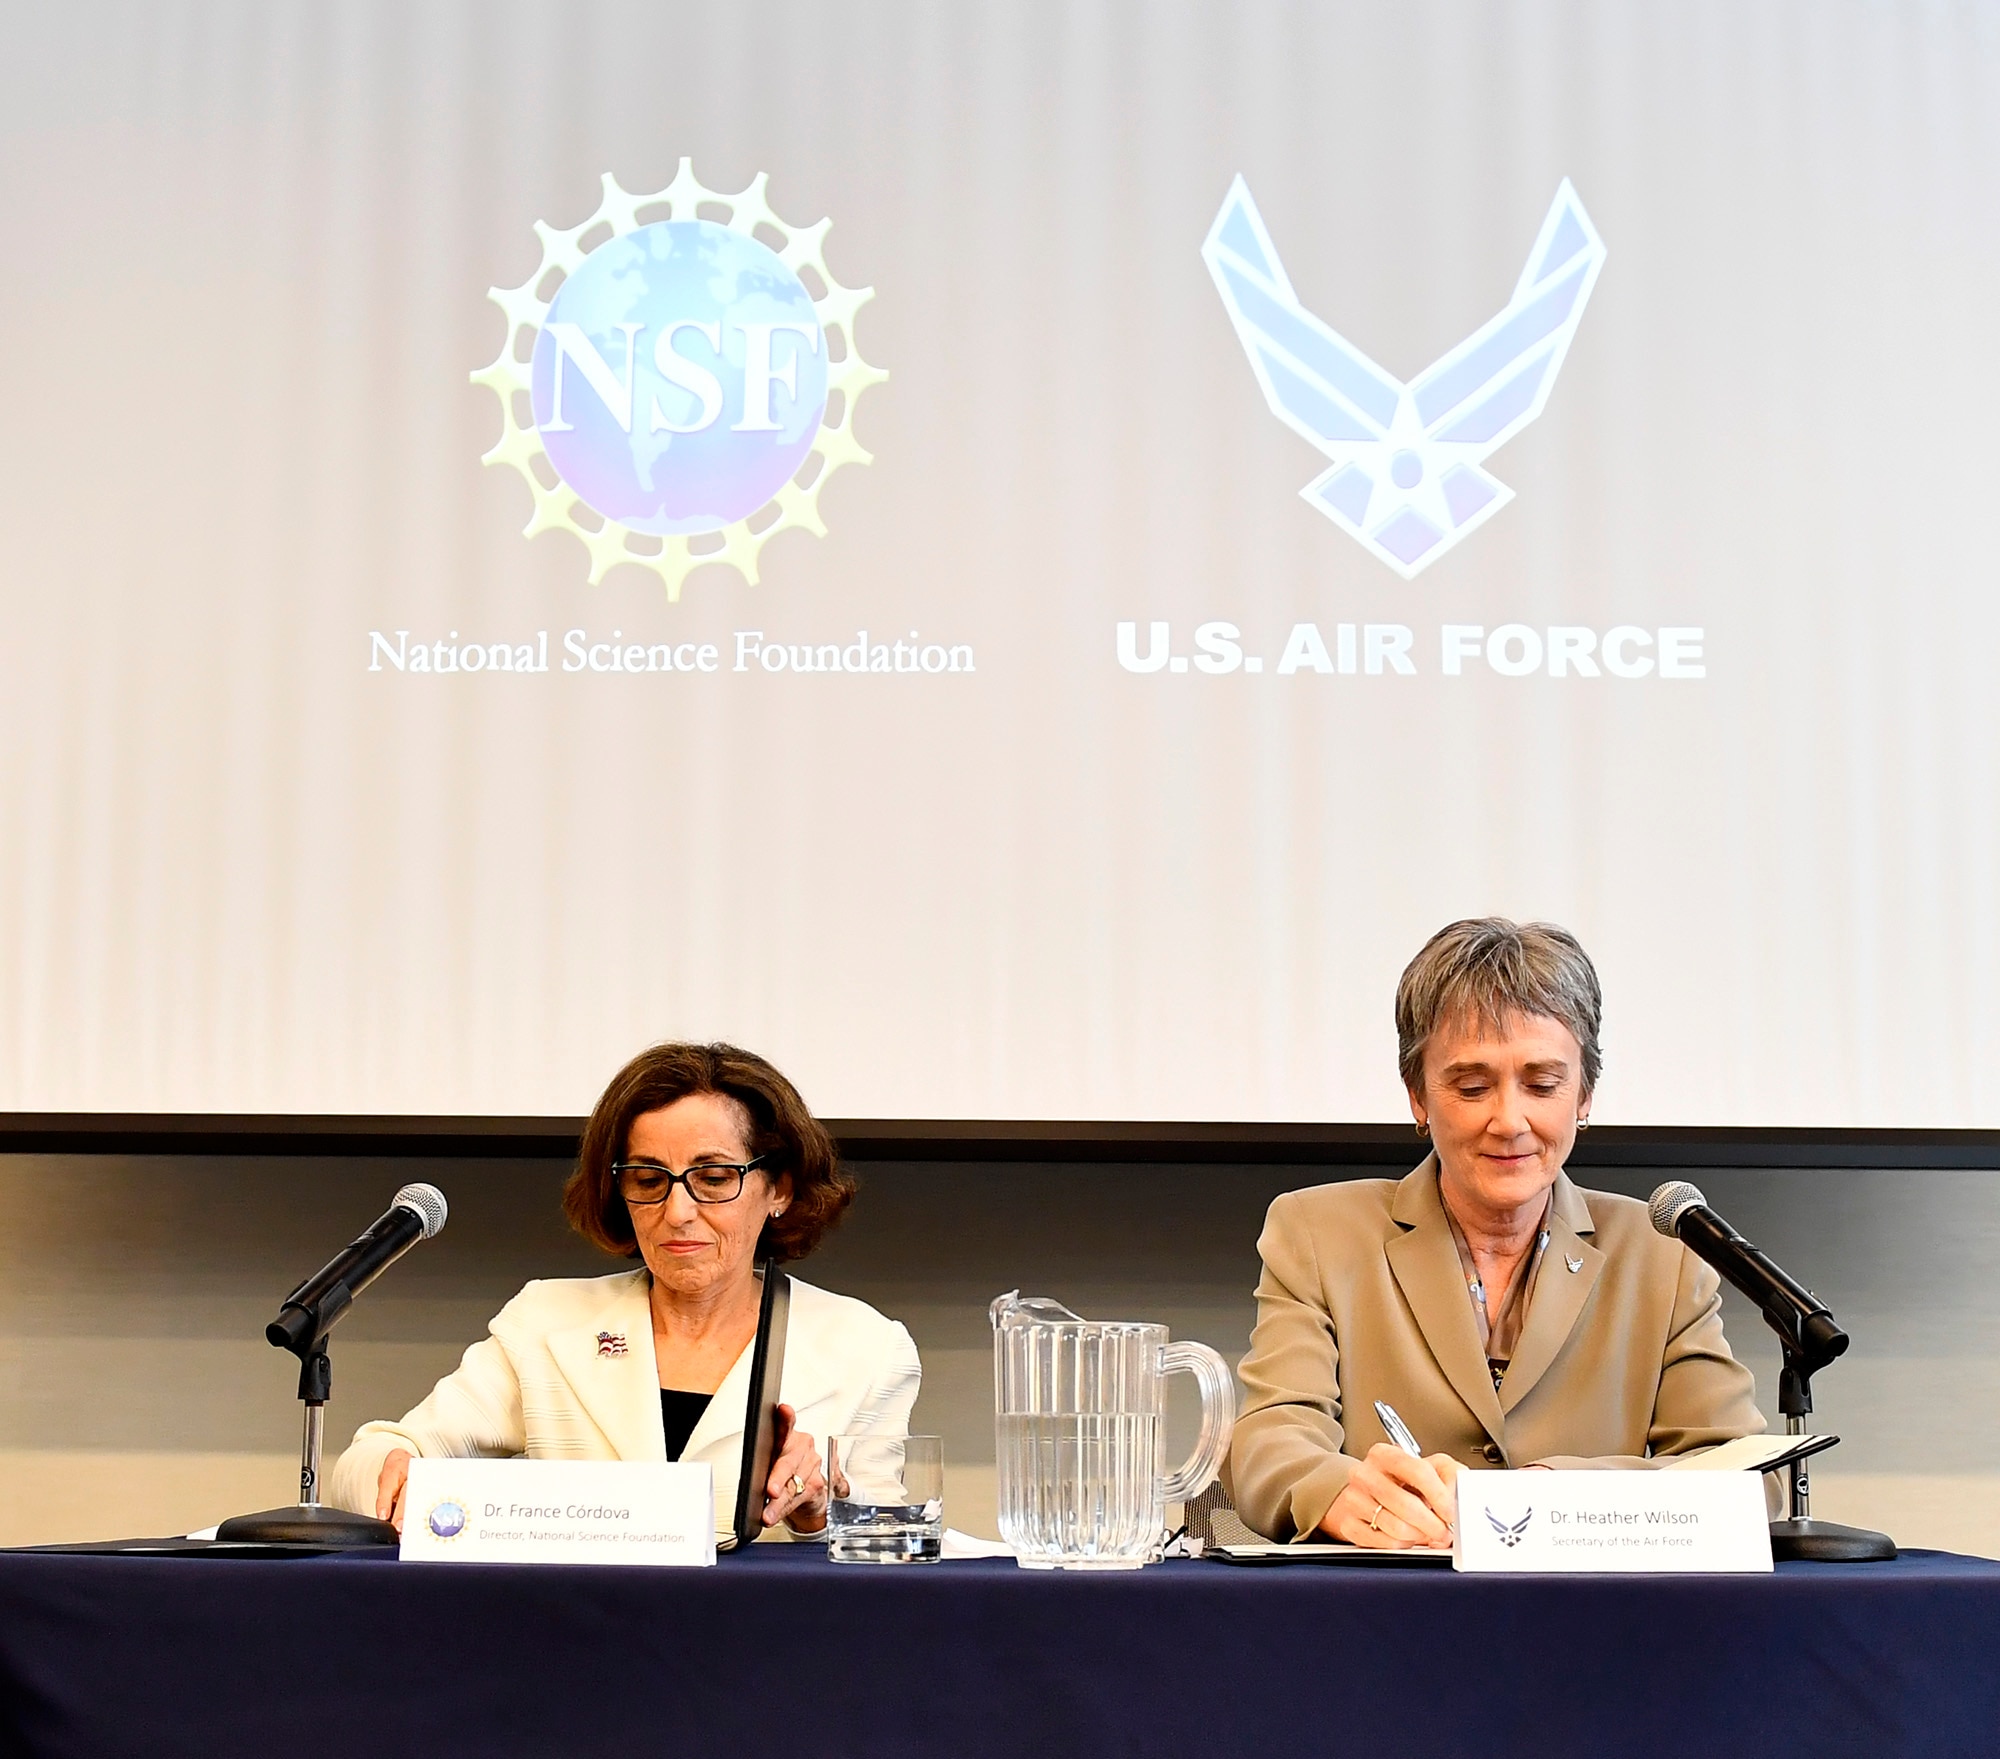 Secretary of the Air Force Heather Wilson and the National Science Foundation Director France Córdova sign a letter of intent in Washington, D.C., May 9, 2018. The letter of intent initiates a strategic partnership focused on research in four areas of common interest: space operations and geosciences, advanced material sciences, information and data sciences, and workforce and processes. (U.S. Air Force photo by Staff Sgt. Rusty Frank)